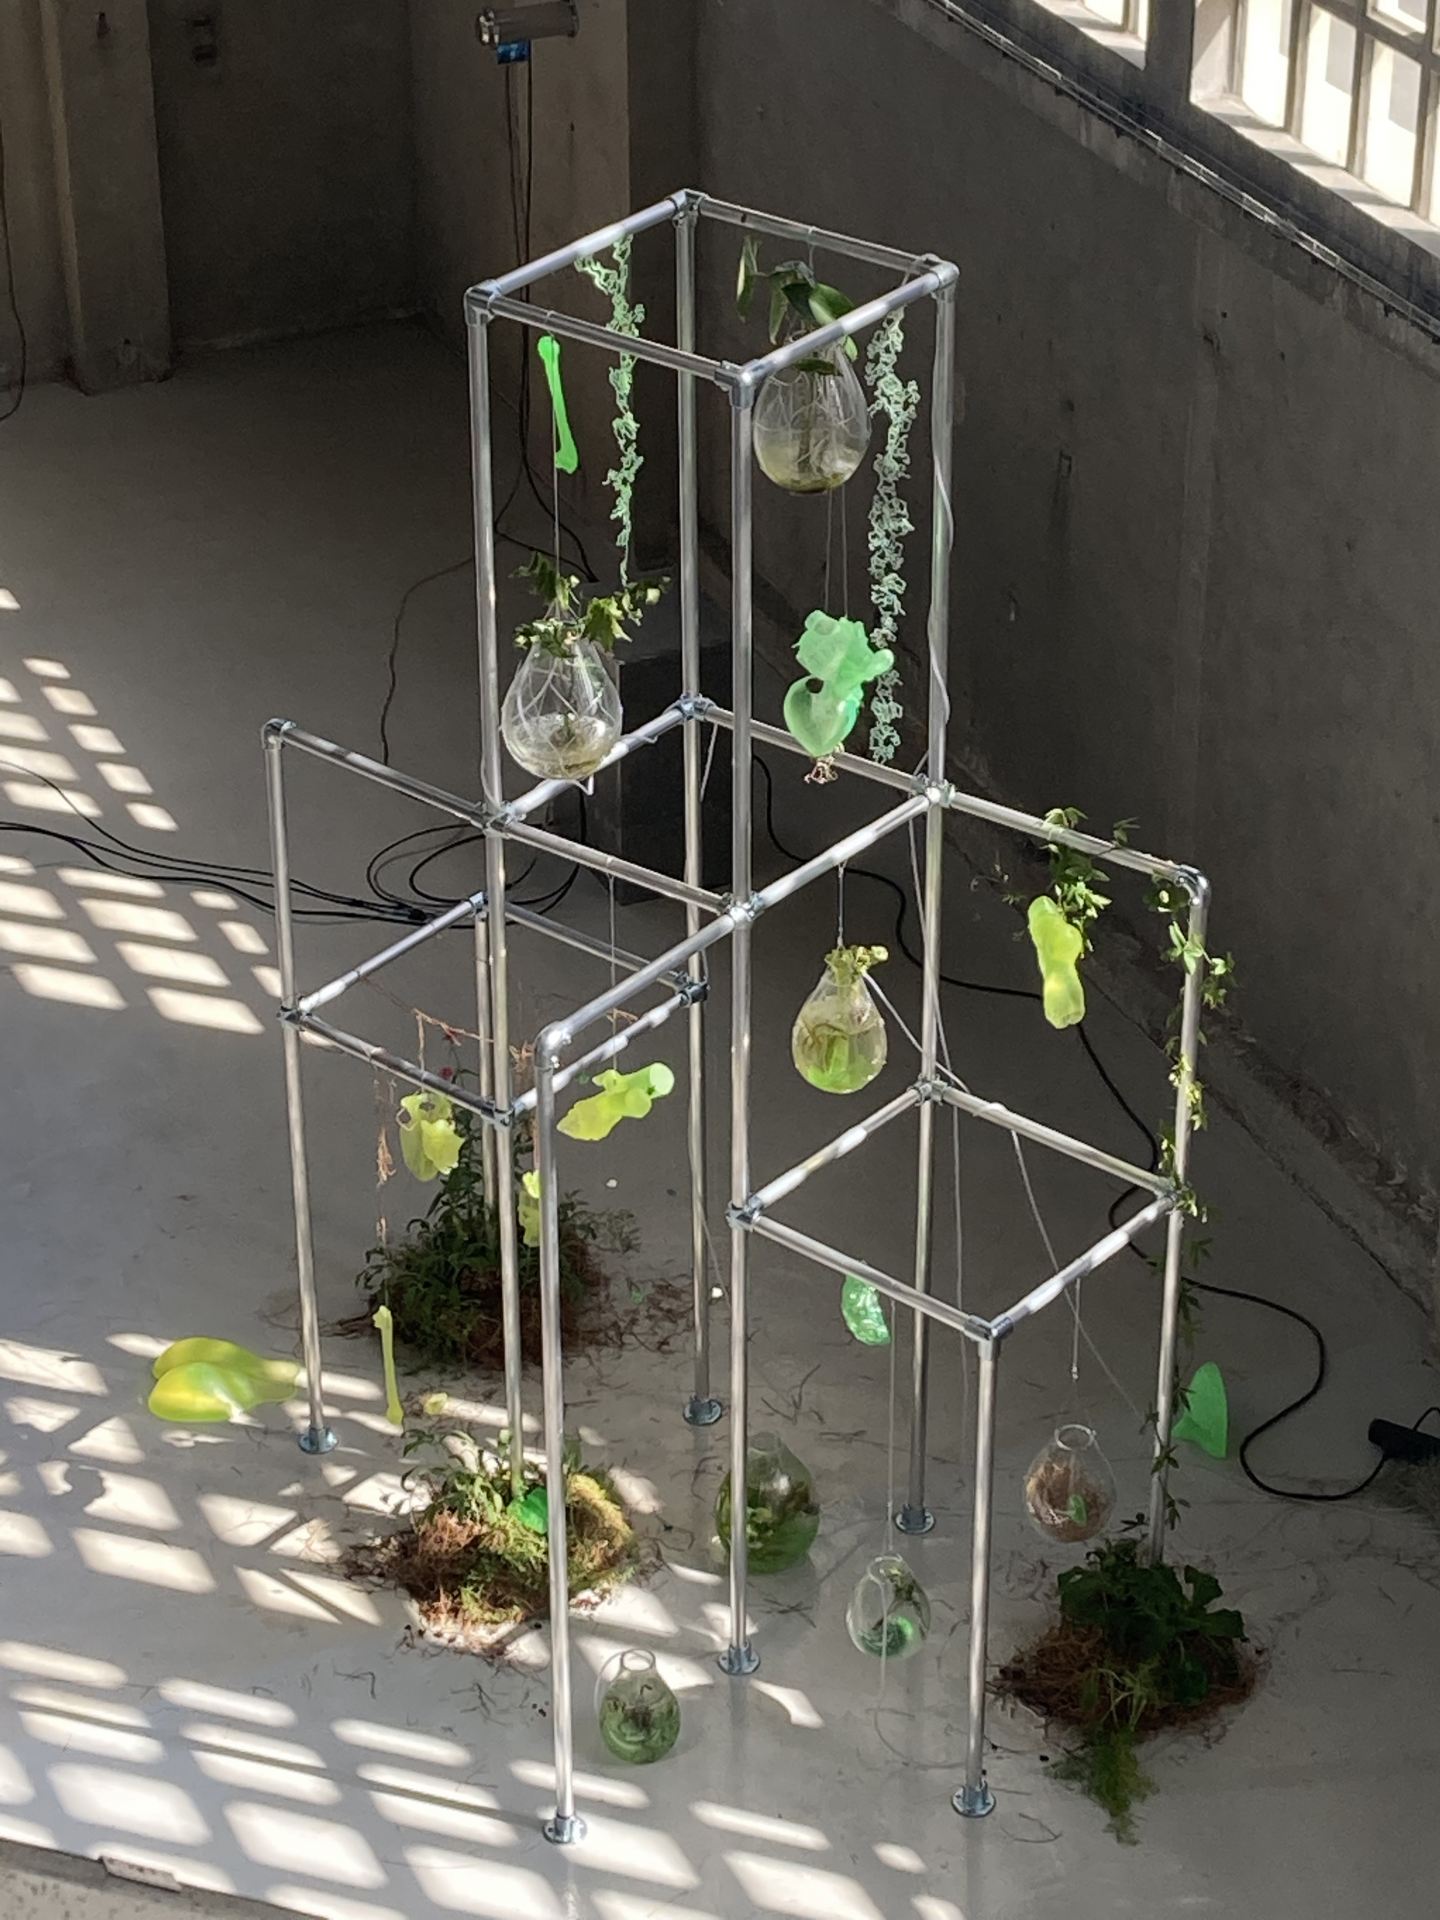 Installation shots of sculptures that demonstrate photosynthesis.